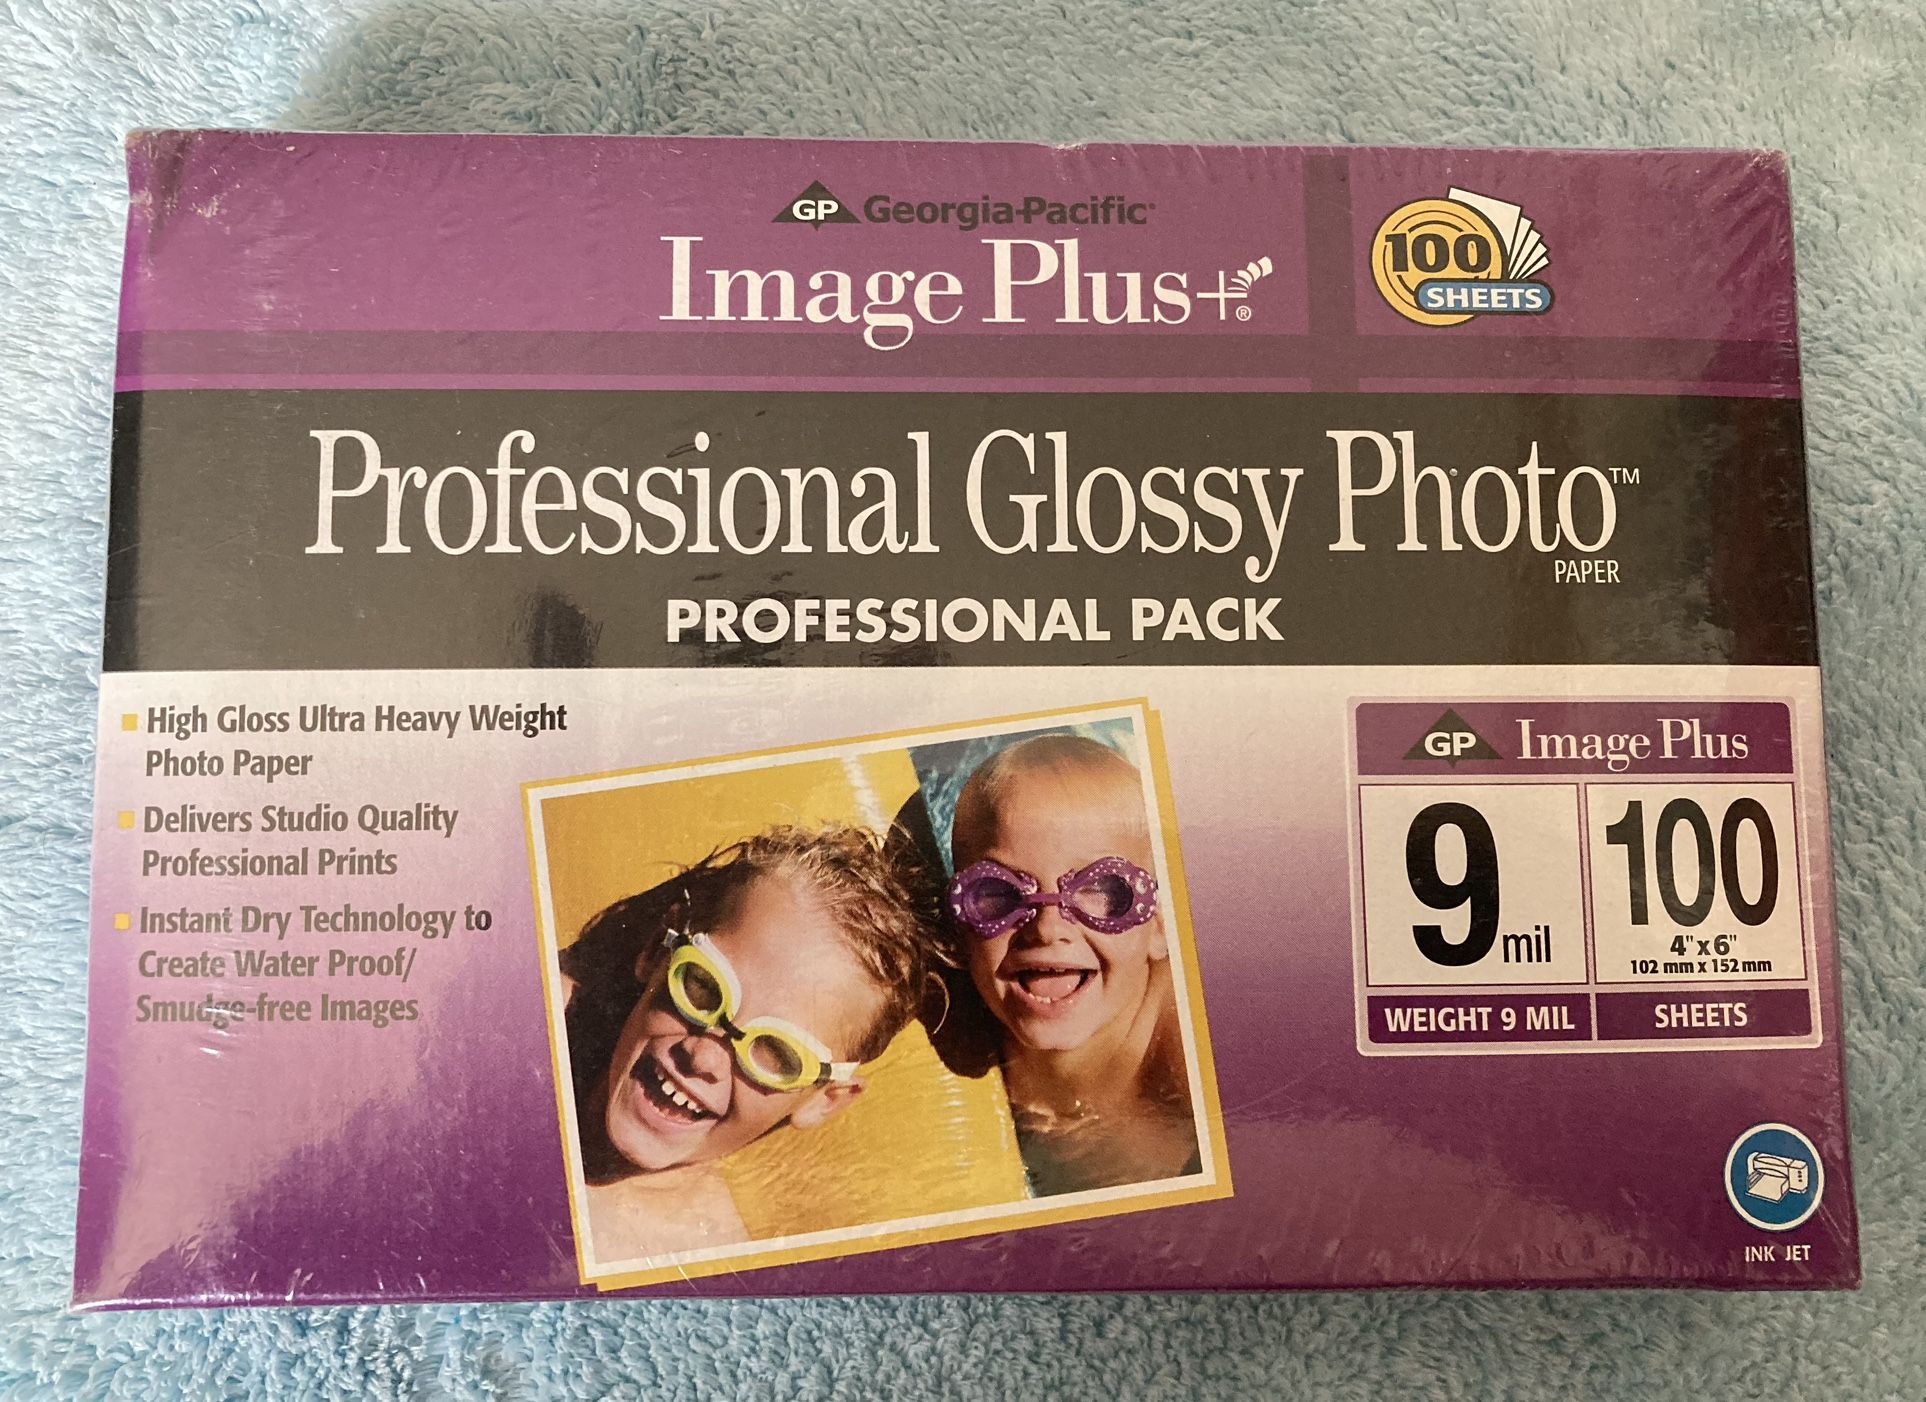 IMAGE PLUS+. PROFESSIONAL GLOSSY PHOTO PAPER (2 Packs 100 Sheets Each) NEW